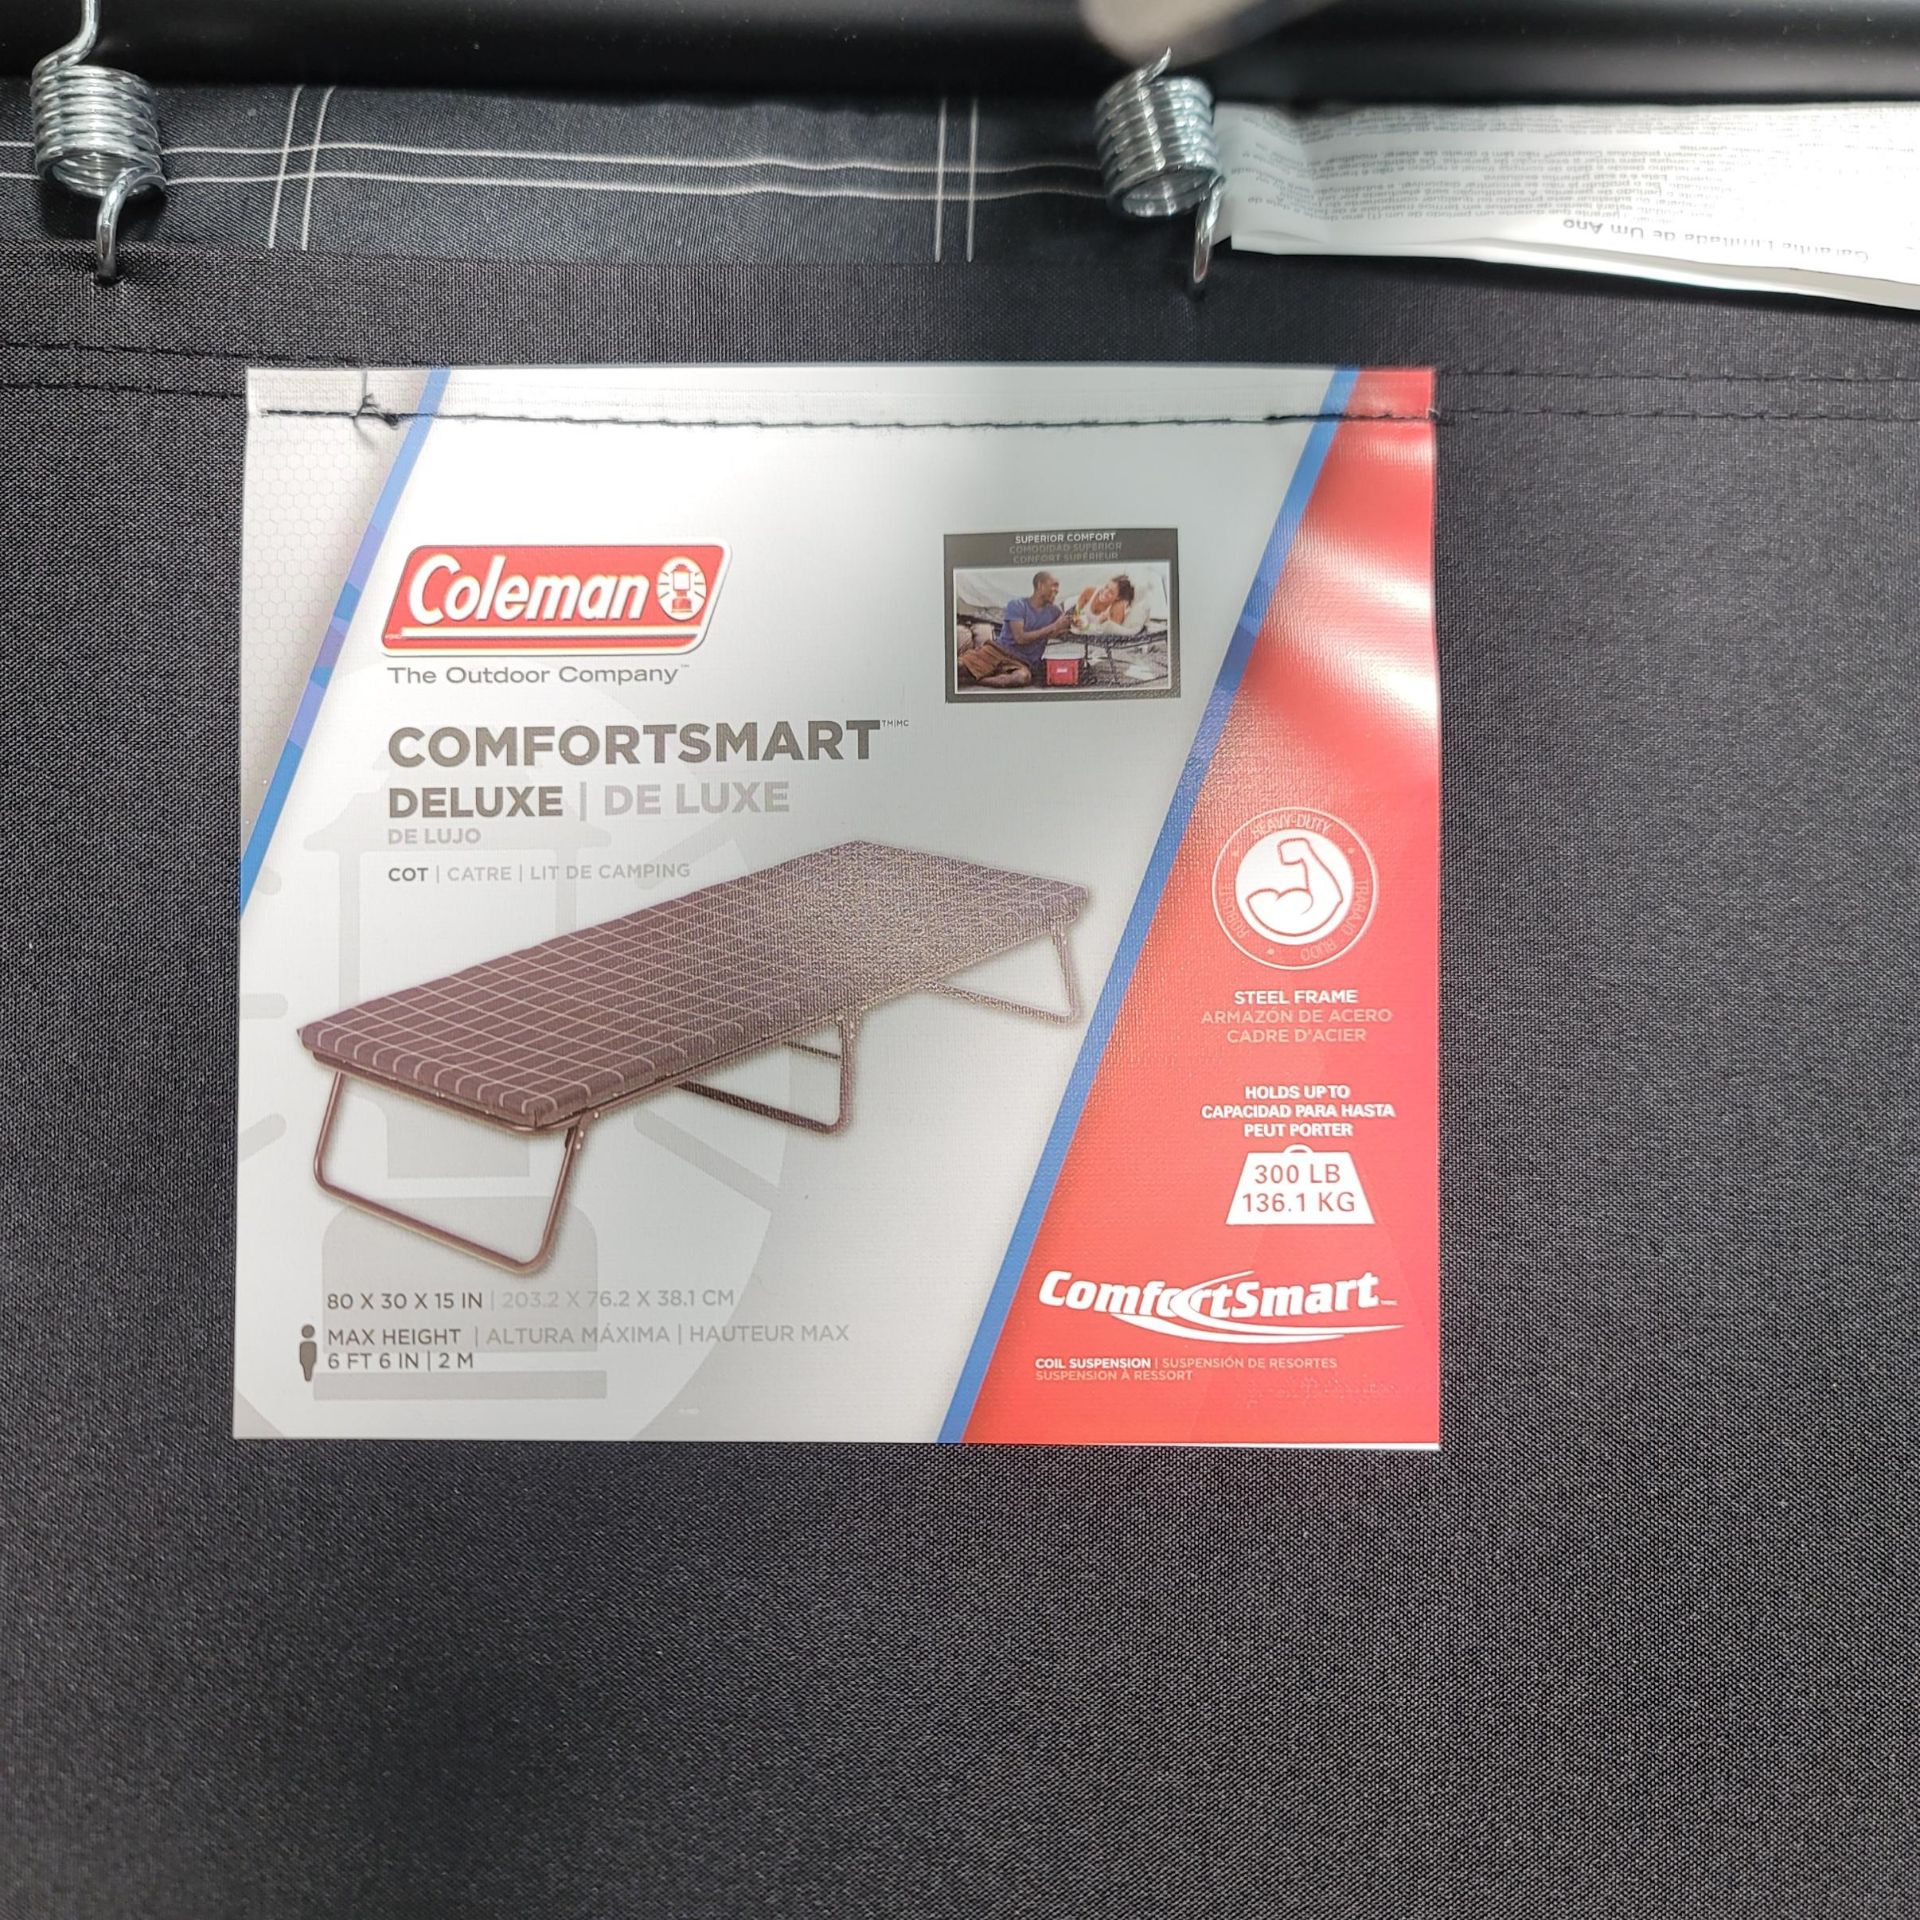 COLEMAN COMFORTSMART DELUXE FOLDING CAMPING COT, HOLDS UP TO 300 LBS, W/ PAD, NEW IN OPEN BOX - Image 2 of 2